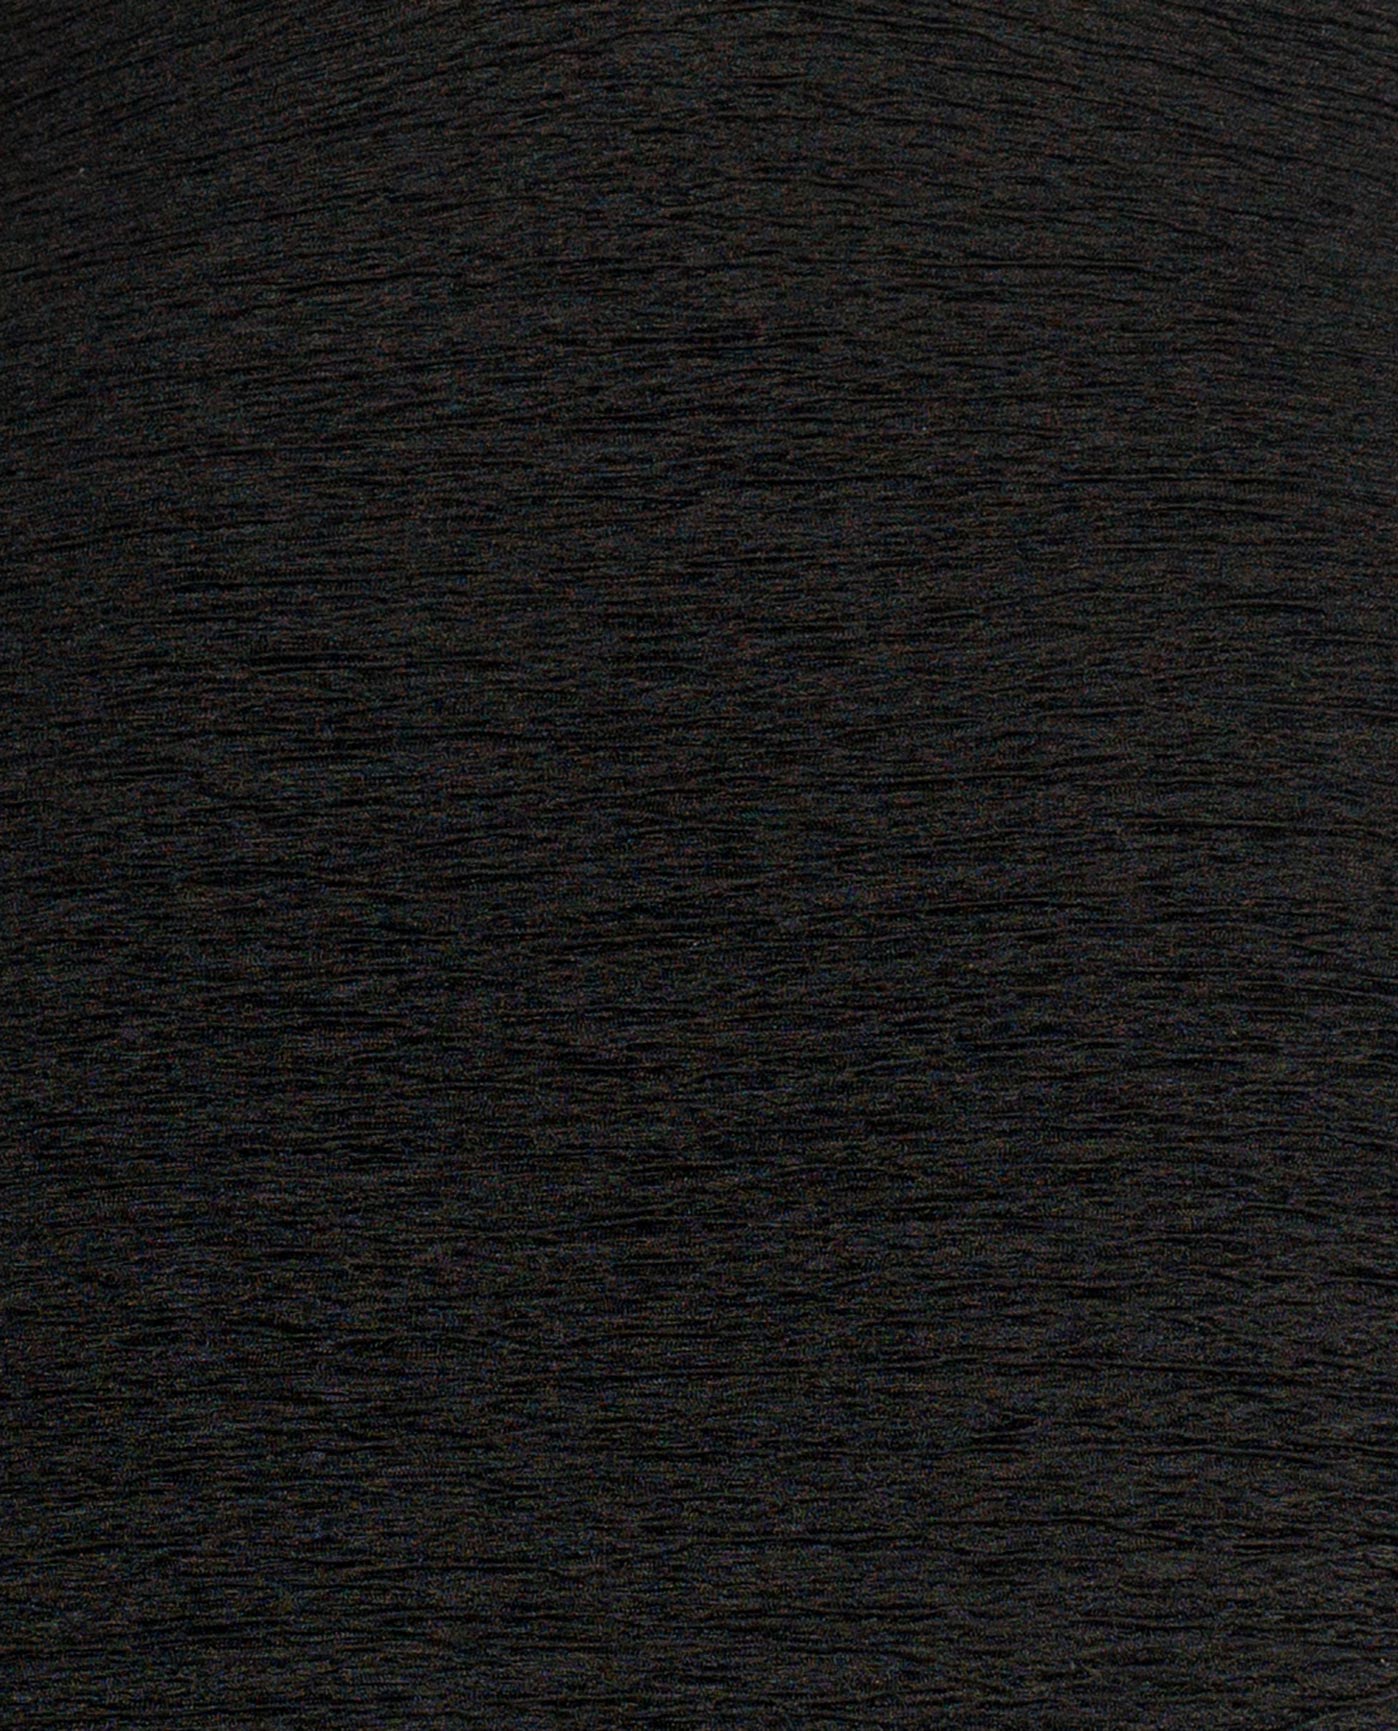 FABRIC SWATCH VIEW OF CHLORINE RESISTANT KRINKLE TEXTURED SOLID EMPIRE MIO PLUS SIZE LONG TORSO ONE PIECE | KRINKLE BLACK 2023